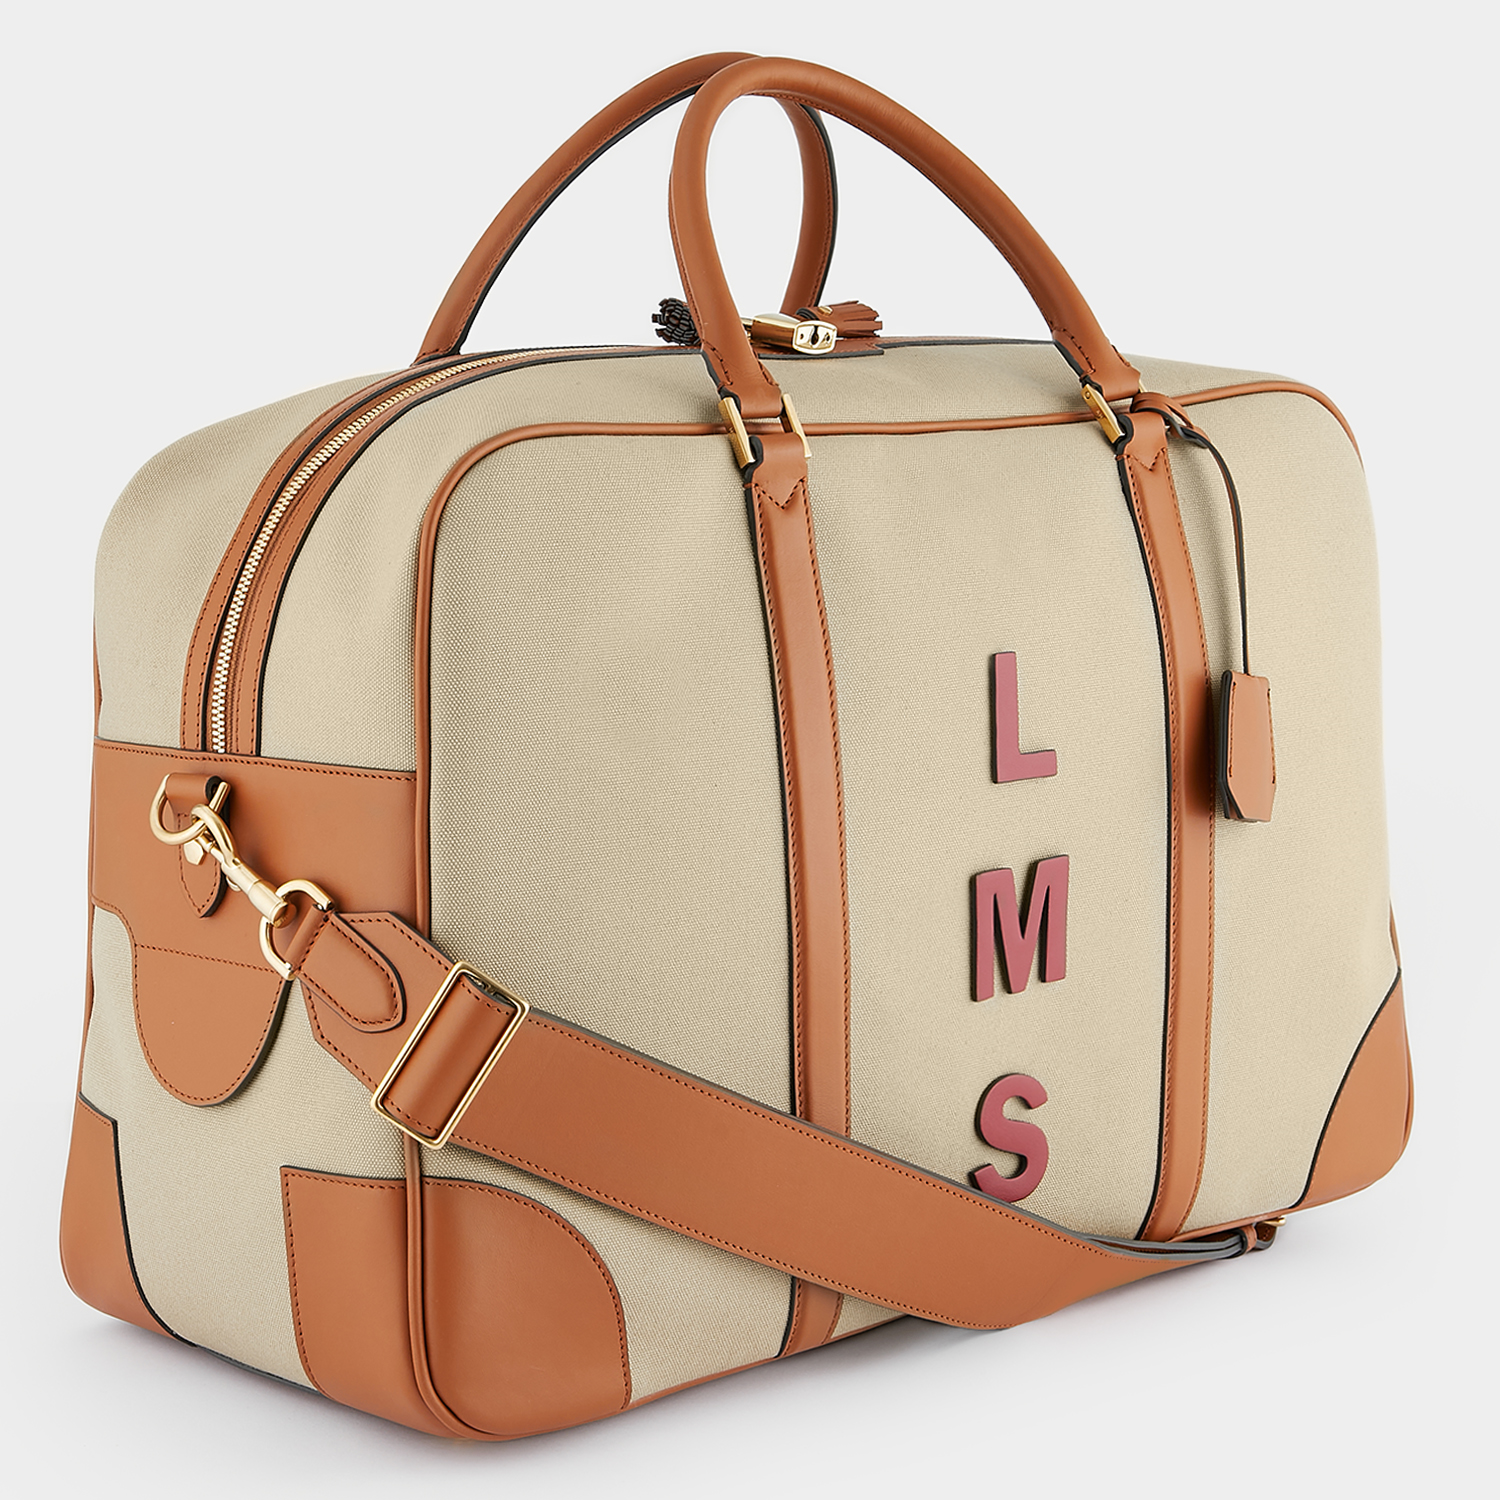 Louis Vuitton Travel and Gym Bag for sale in Ethiopia